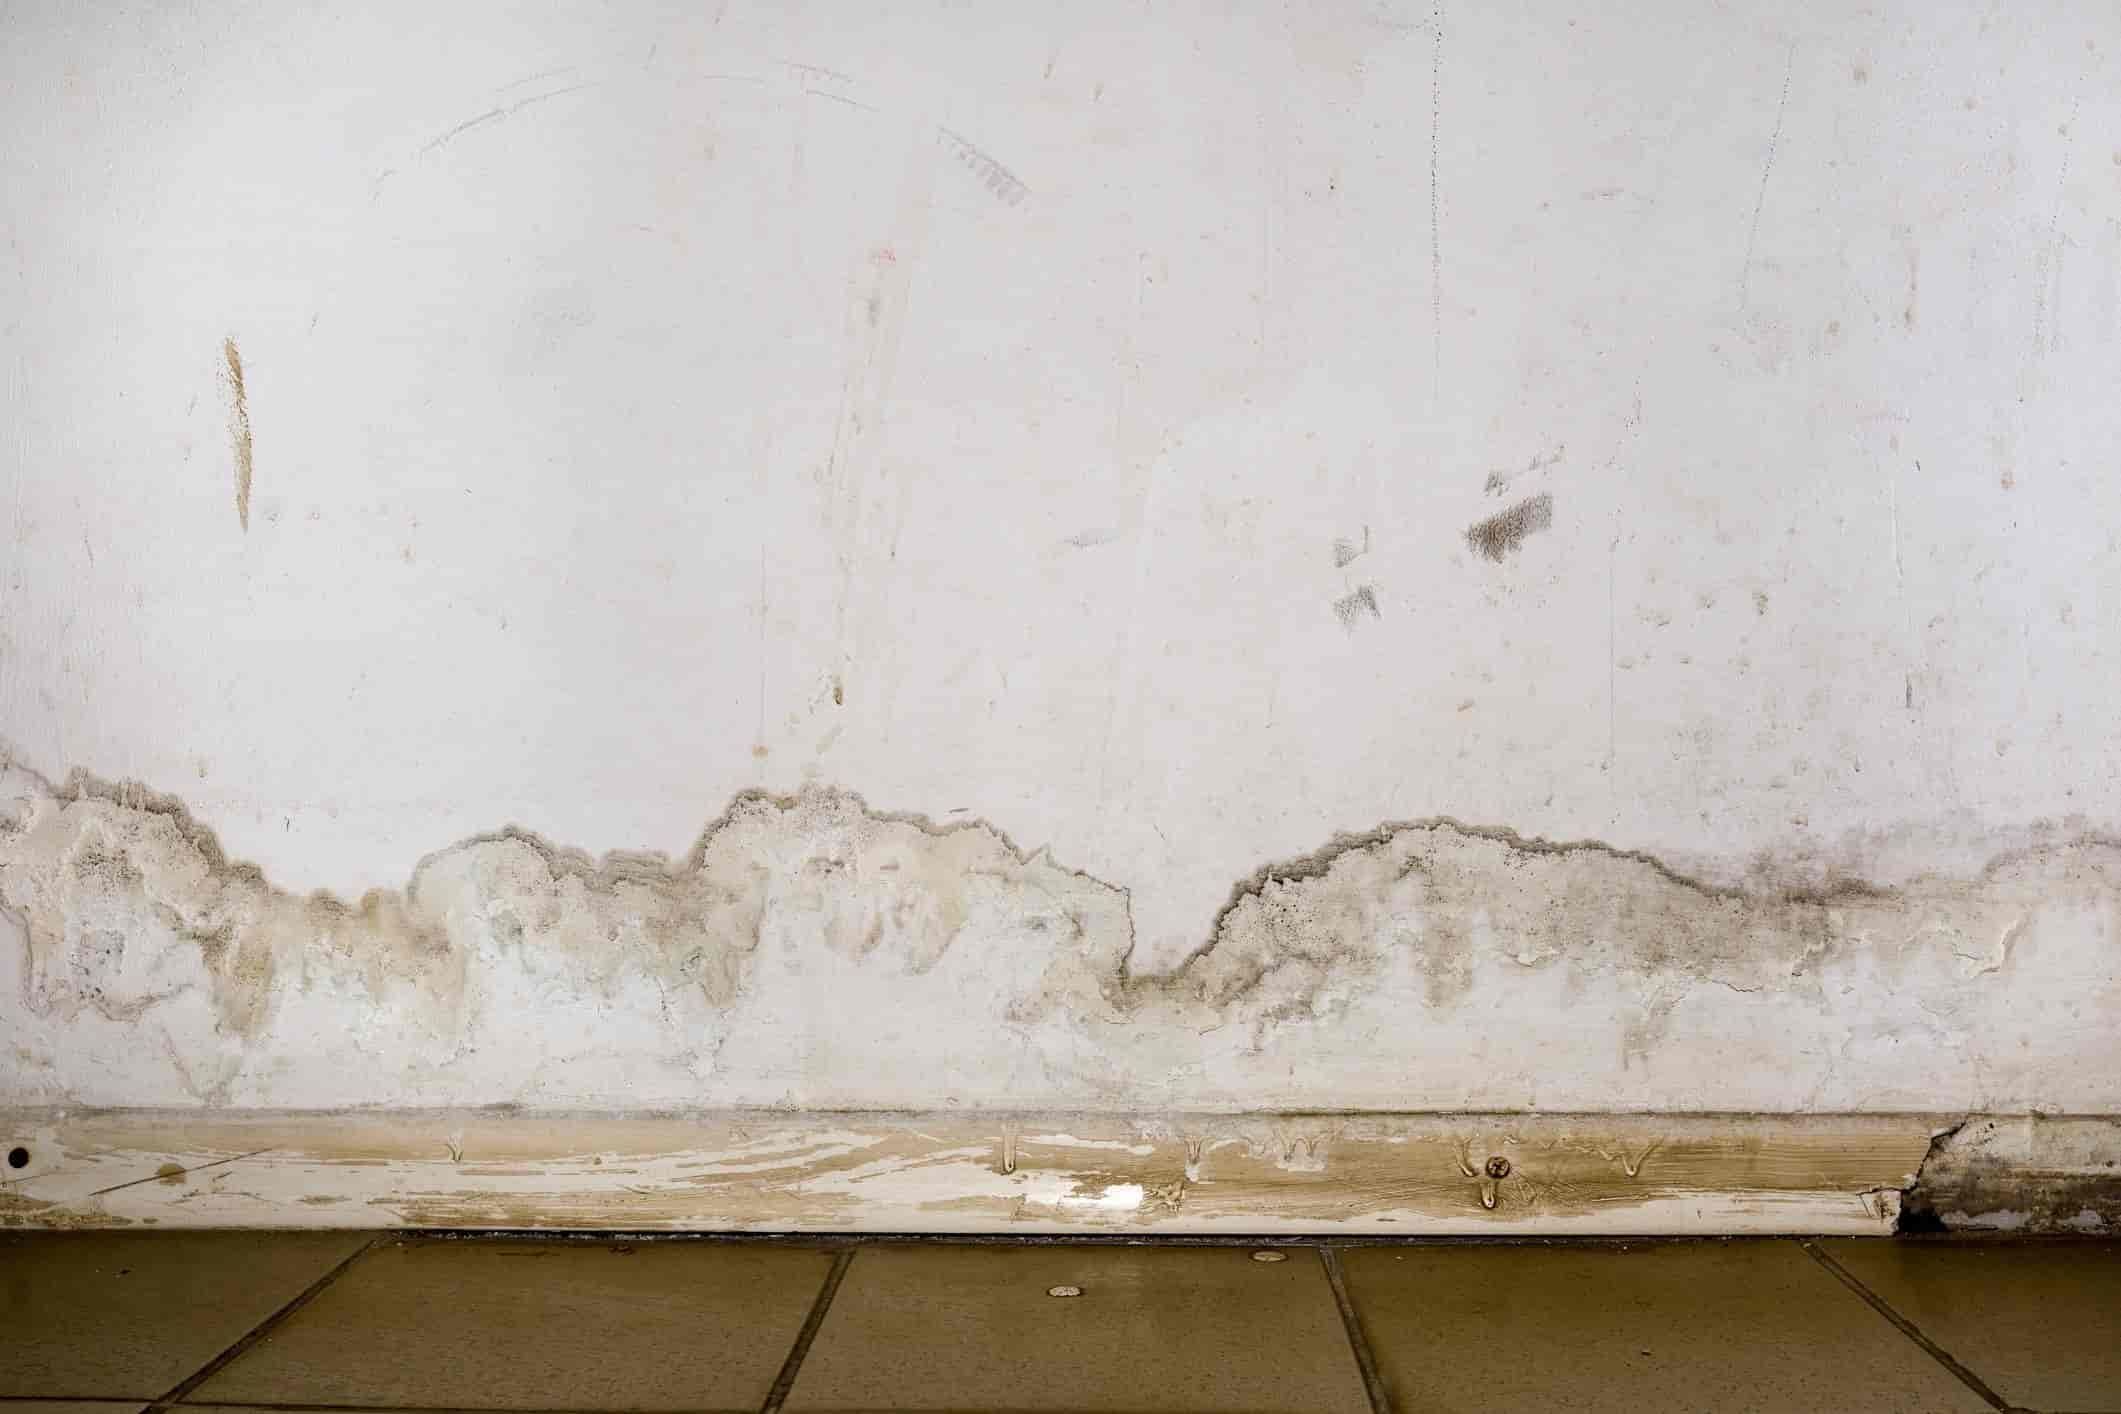 How To Treat Damp Walls In Your Home | Chill